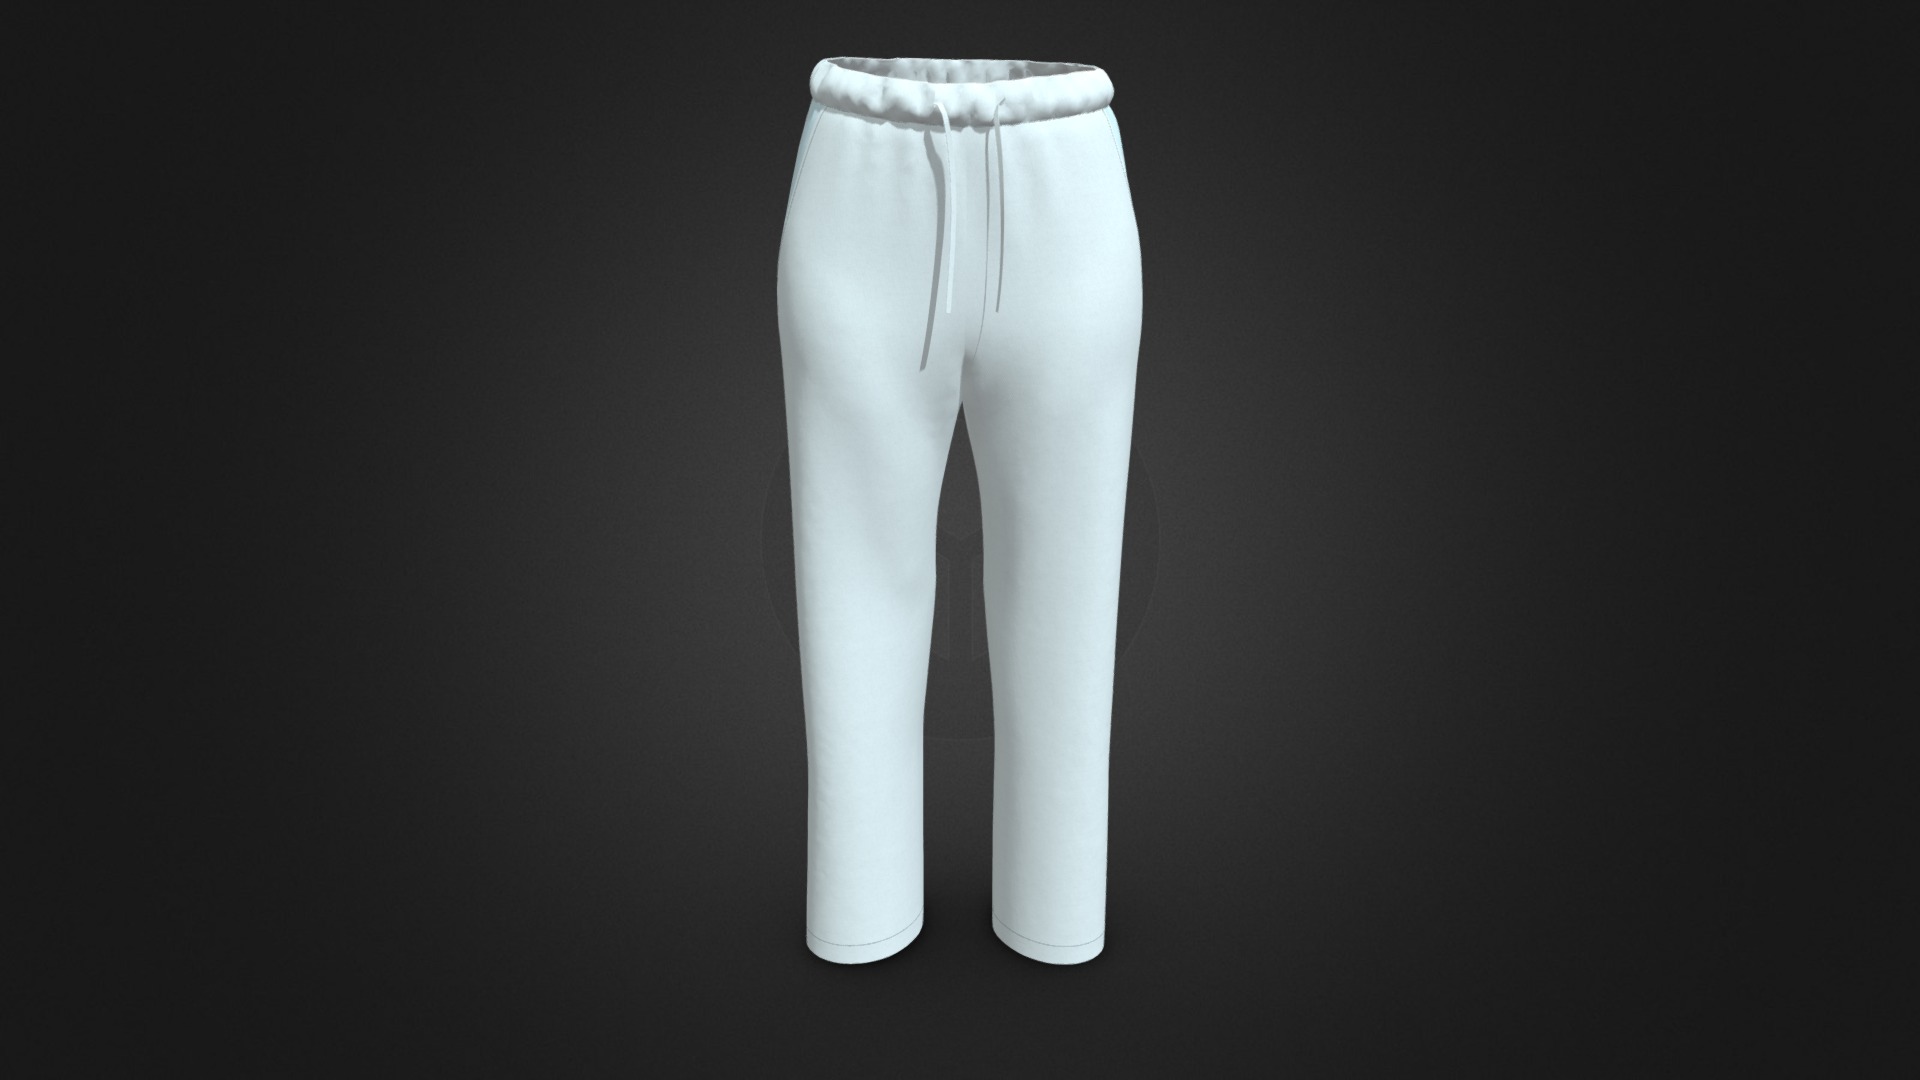 3D model Easywear pants - This is a 3D model of the Easywear pants. The 3D model is about a white cylindrical object.